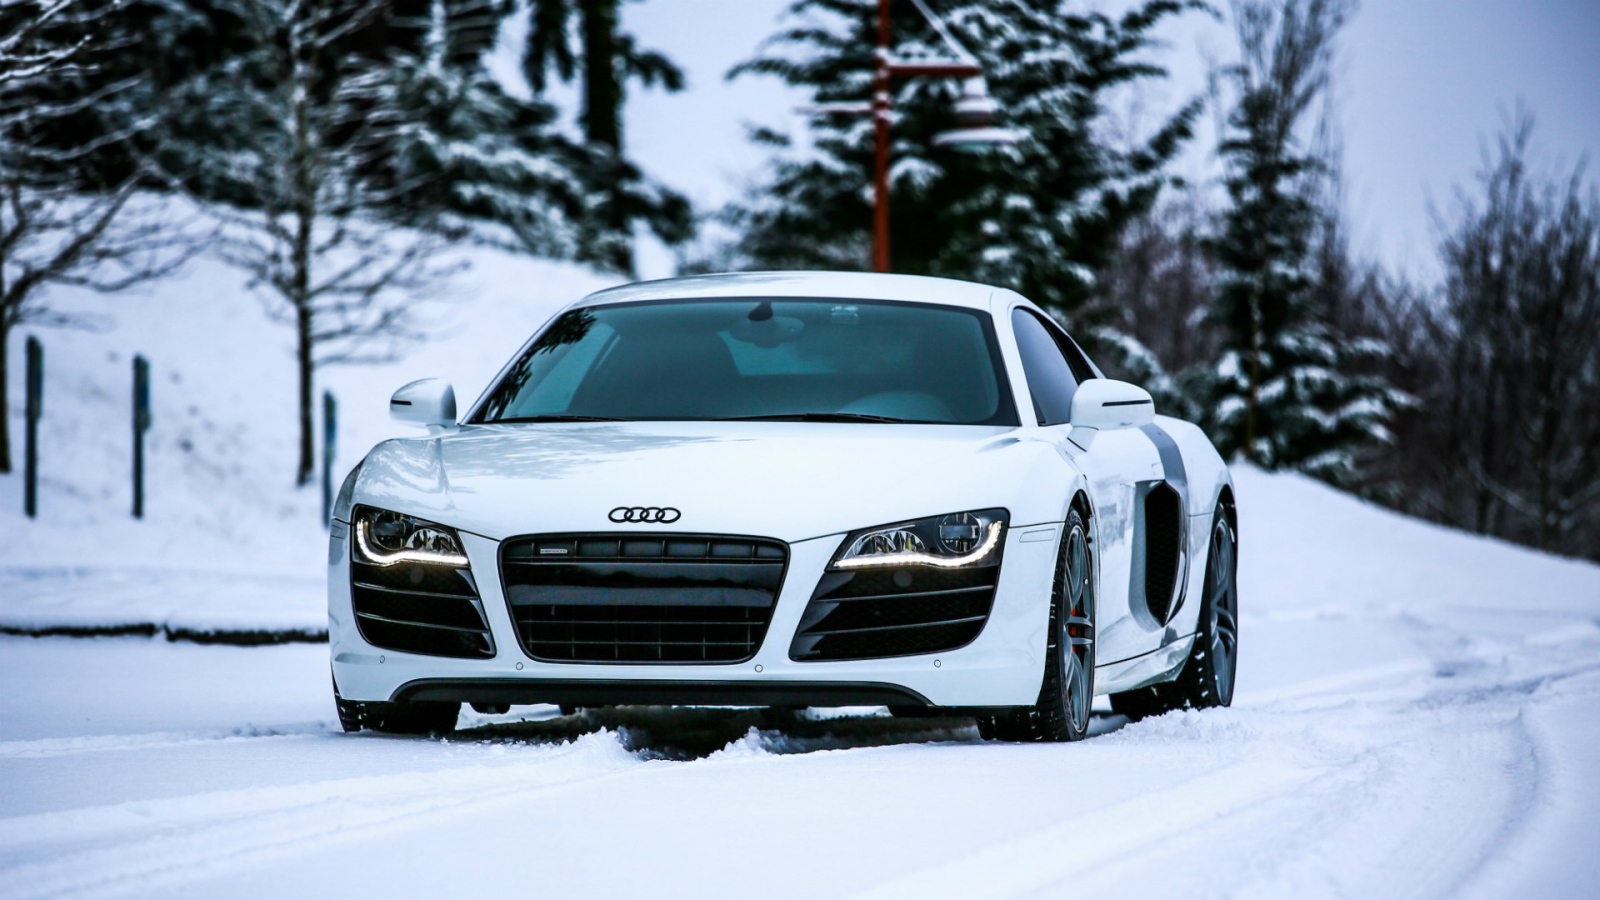 Audi R8 rides in the snow